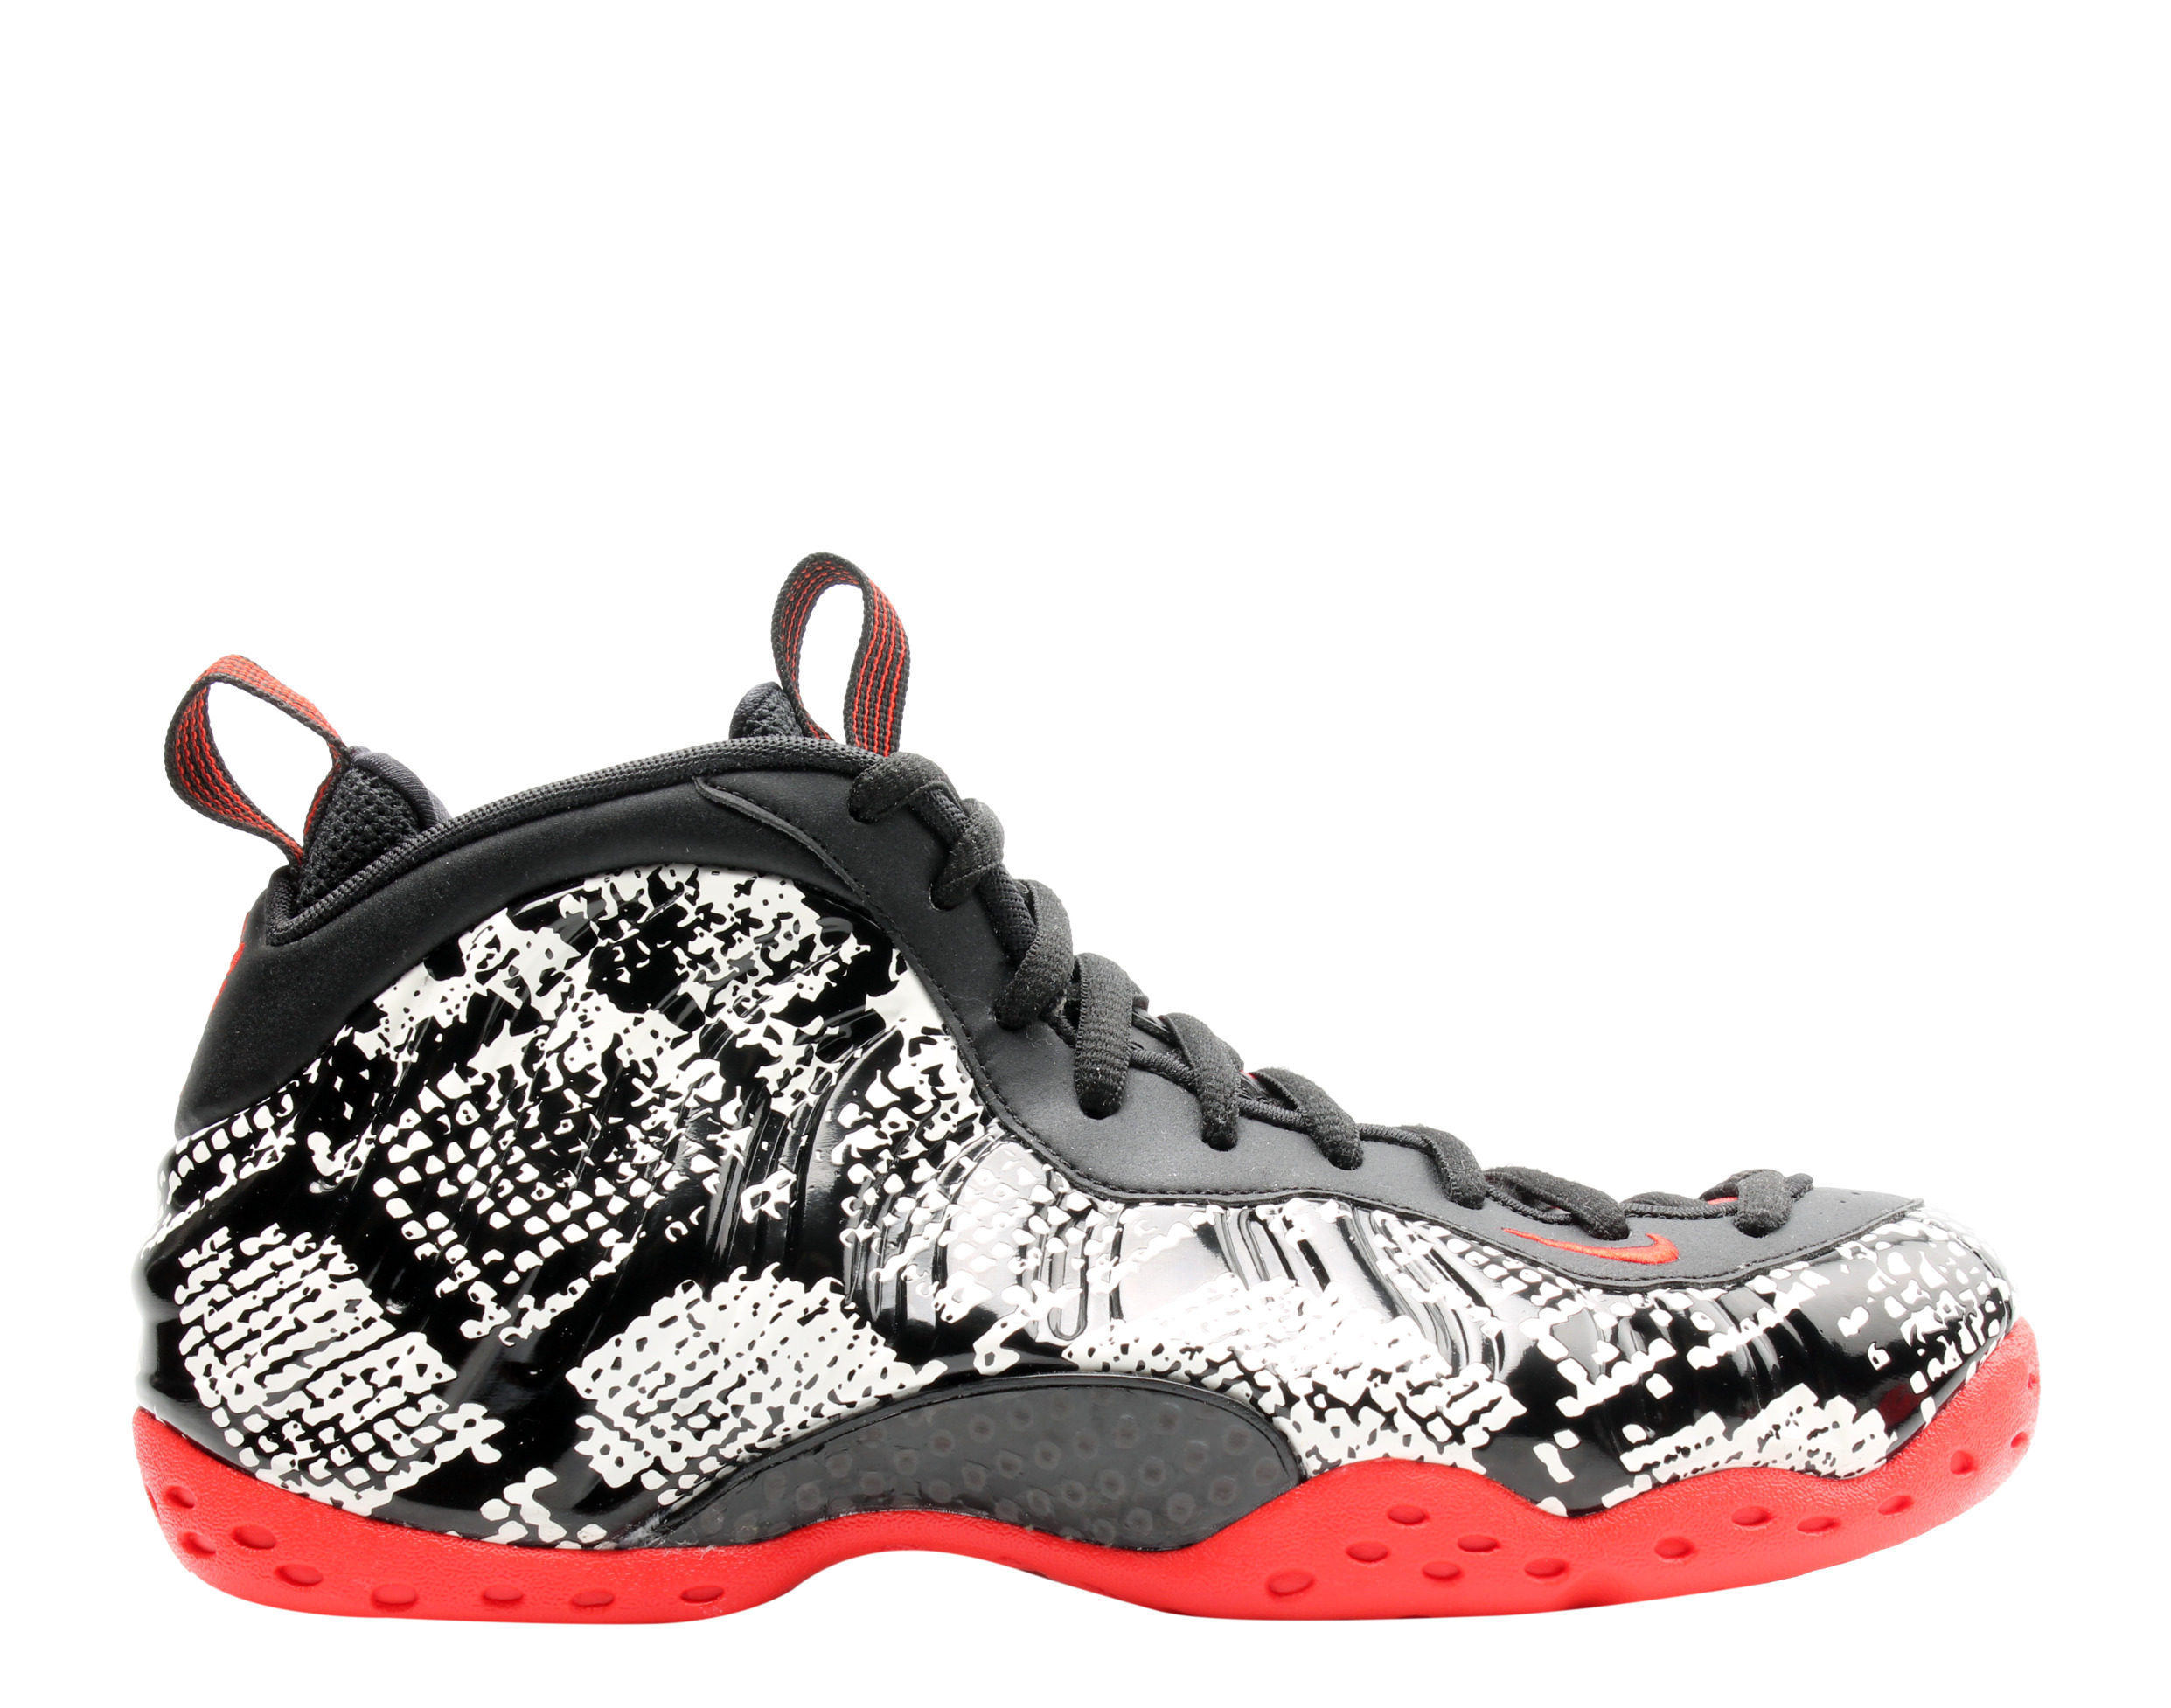 Nike Air Foamposite One Sail/Black-Red Snake Men's Basketball Shoes 314996-101 - image 2 of 6